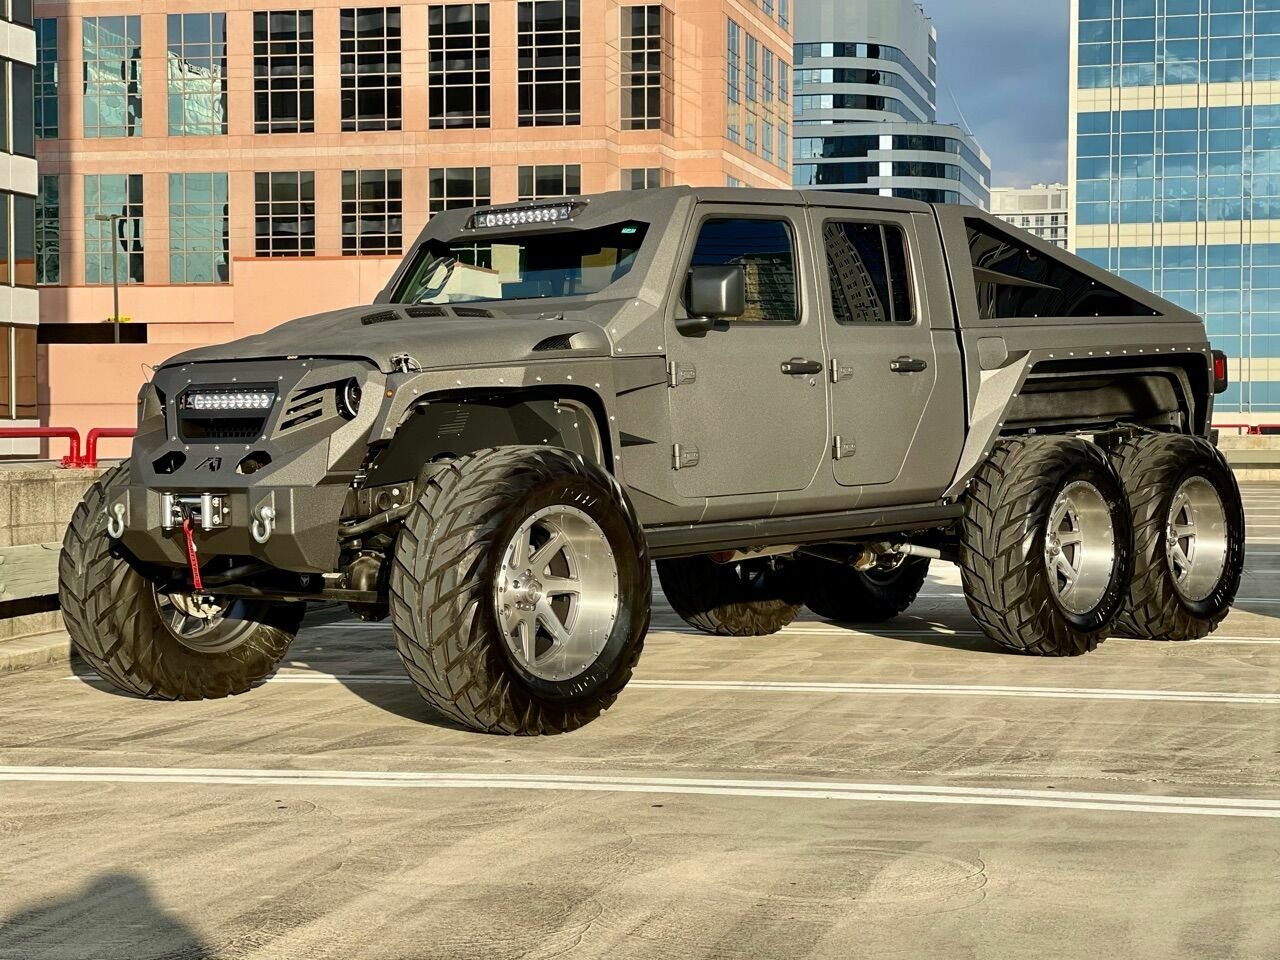 Jeep Based Apocolypse Hellfire 6×6 Is A Crazy Road Legal Vehicle